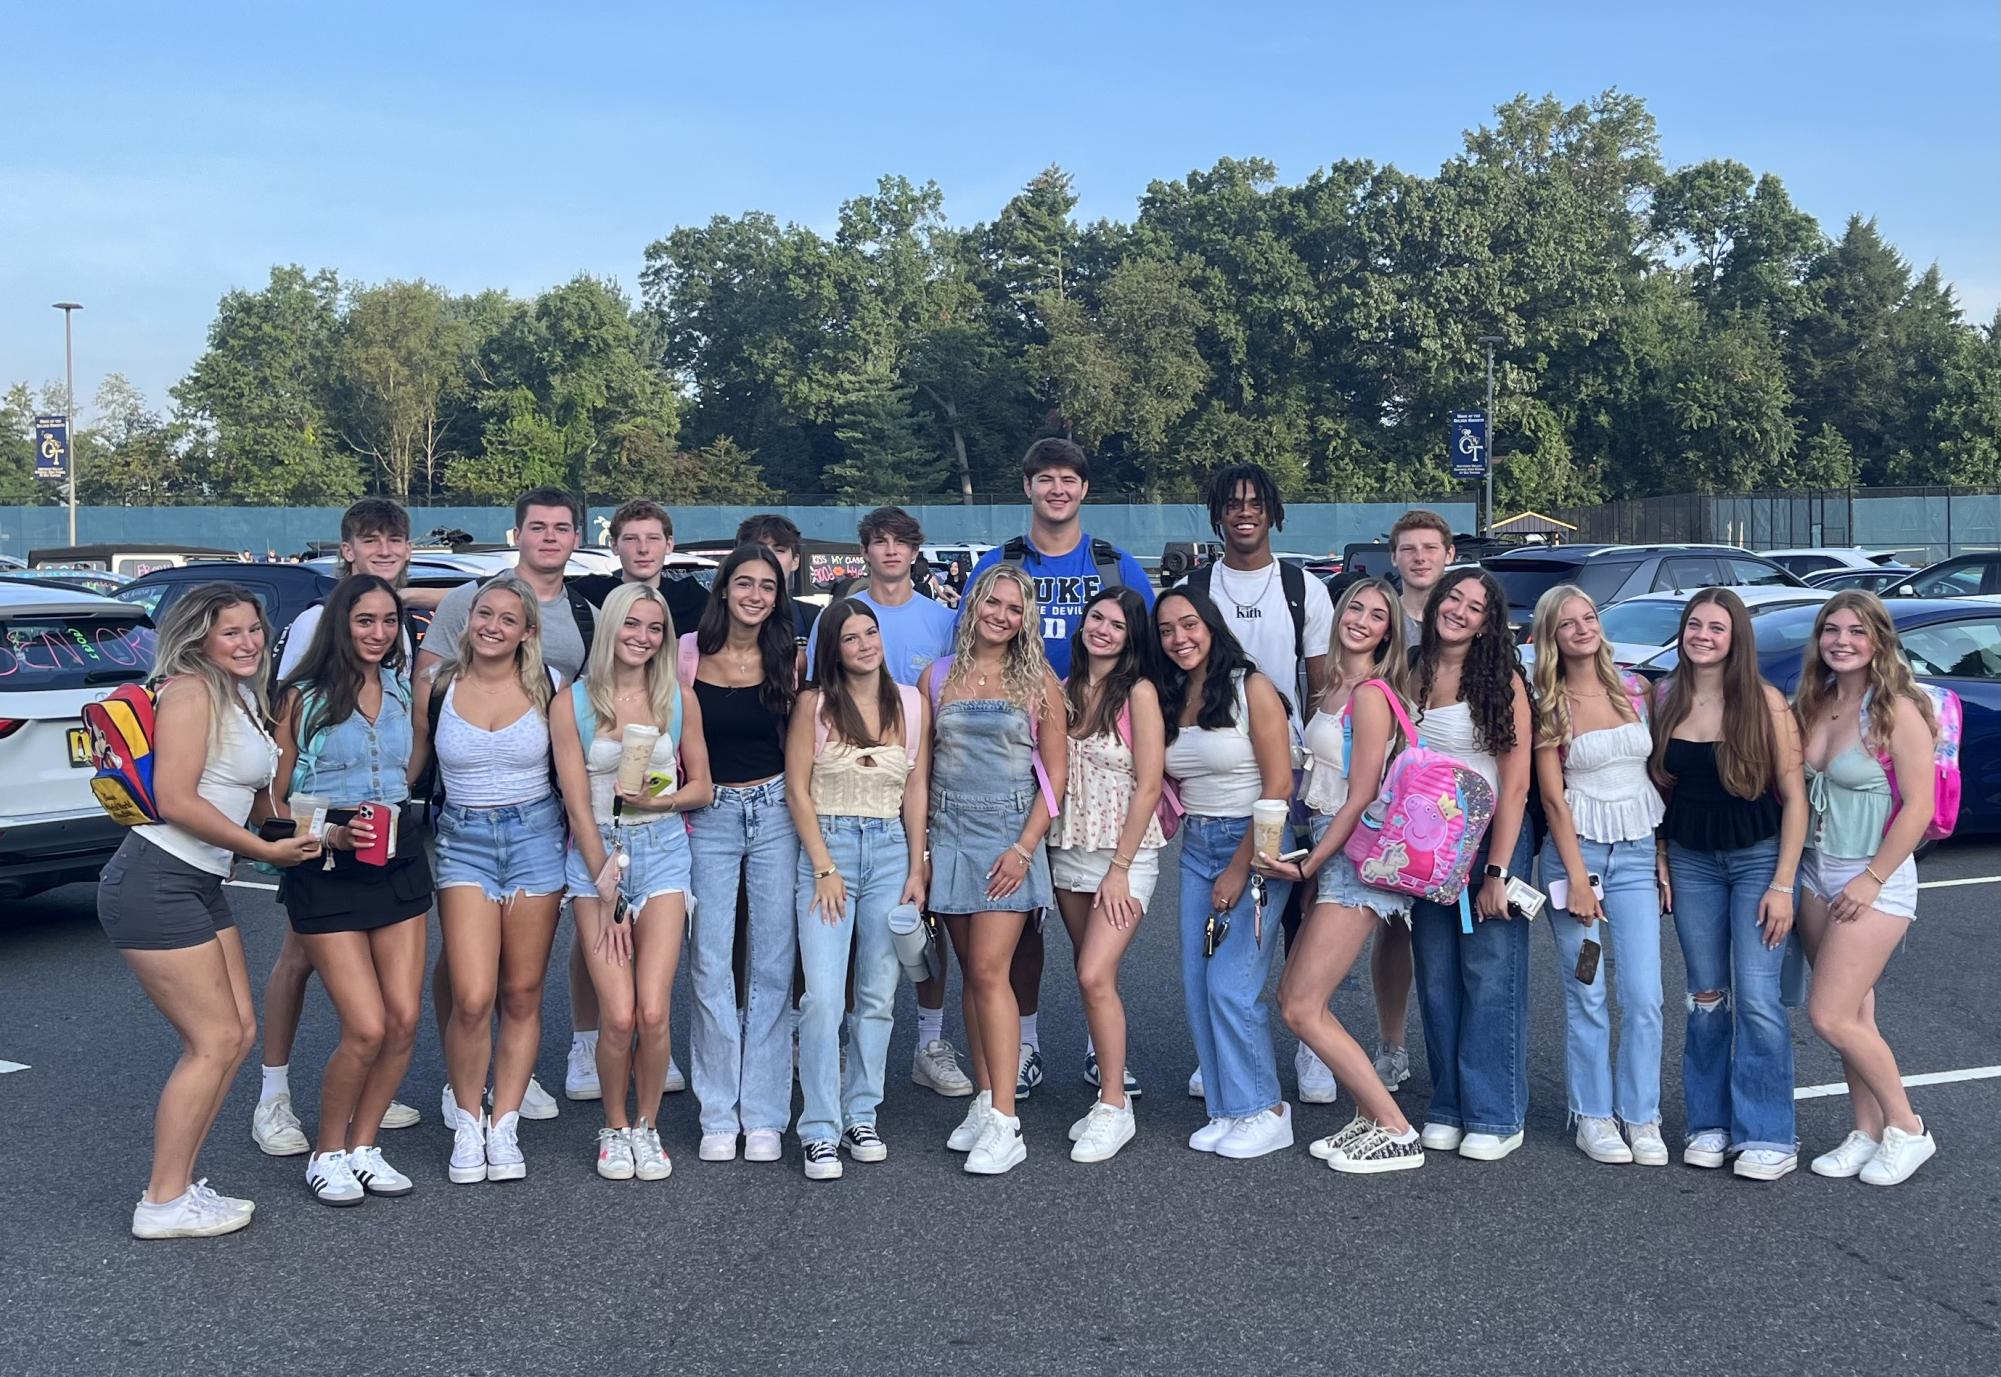 Seniors take photos together ahead of their final first day of school 